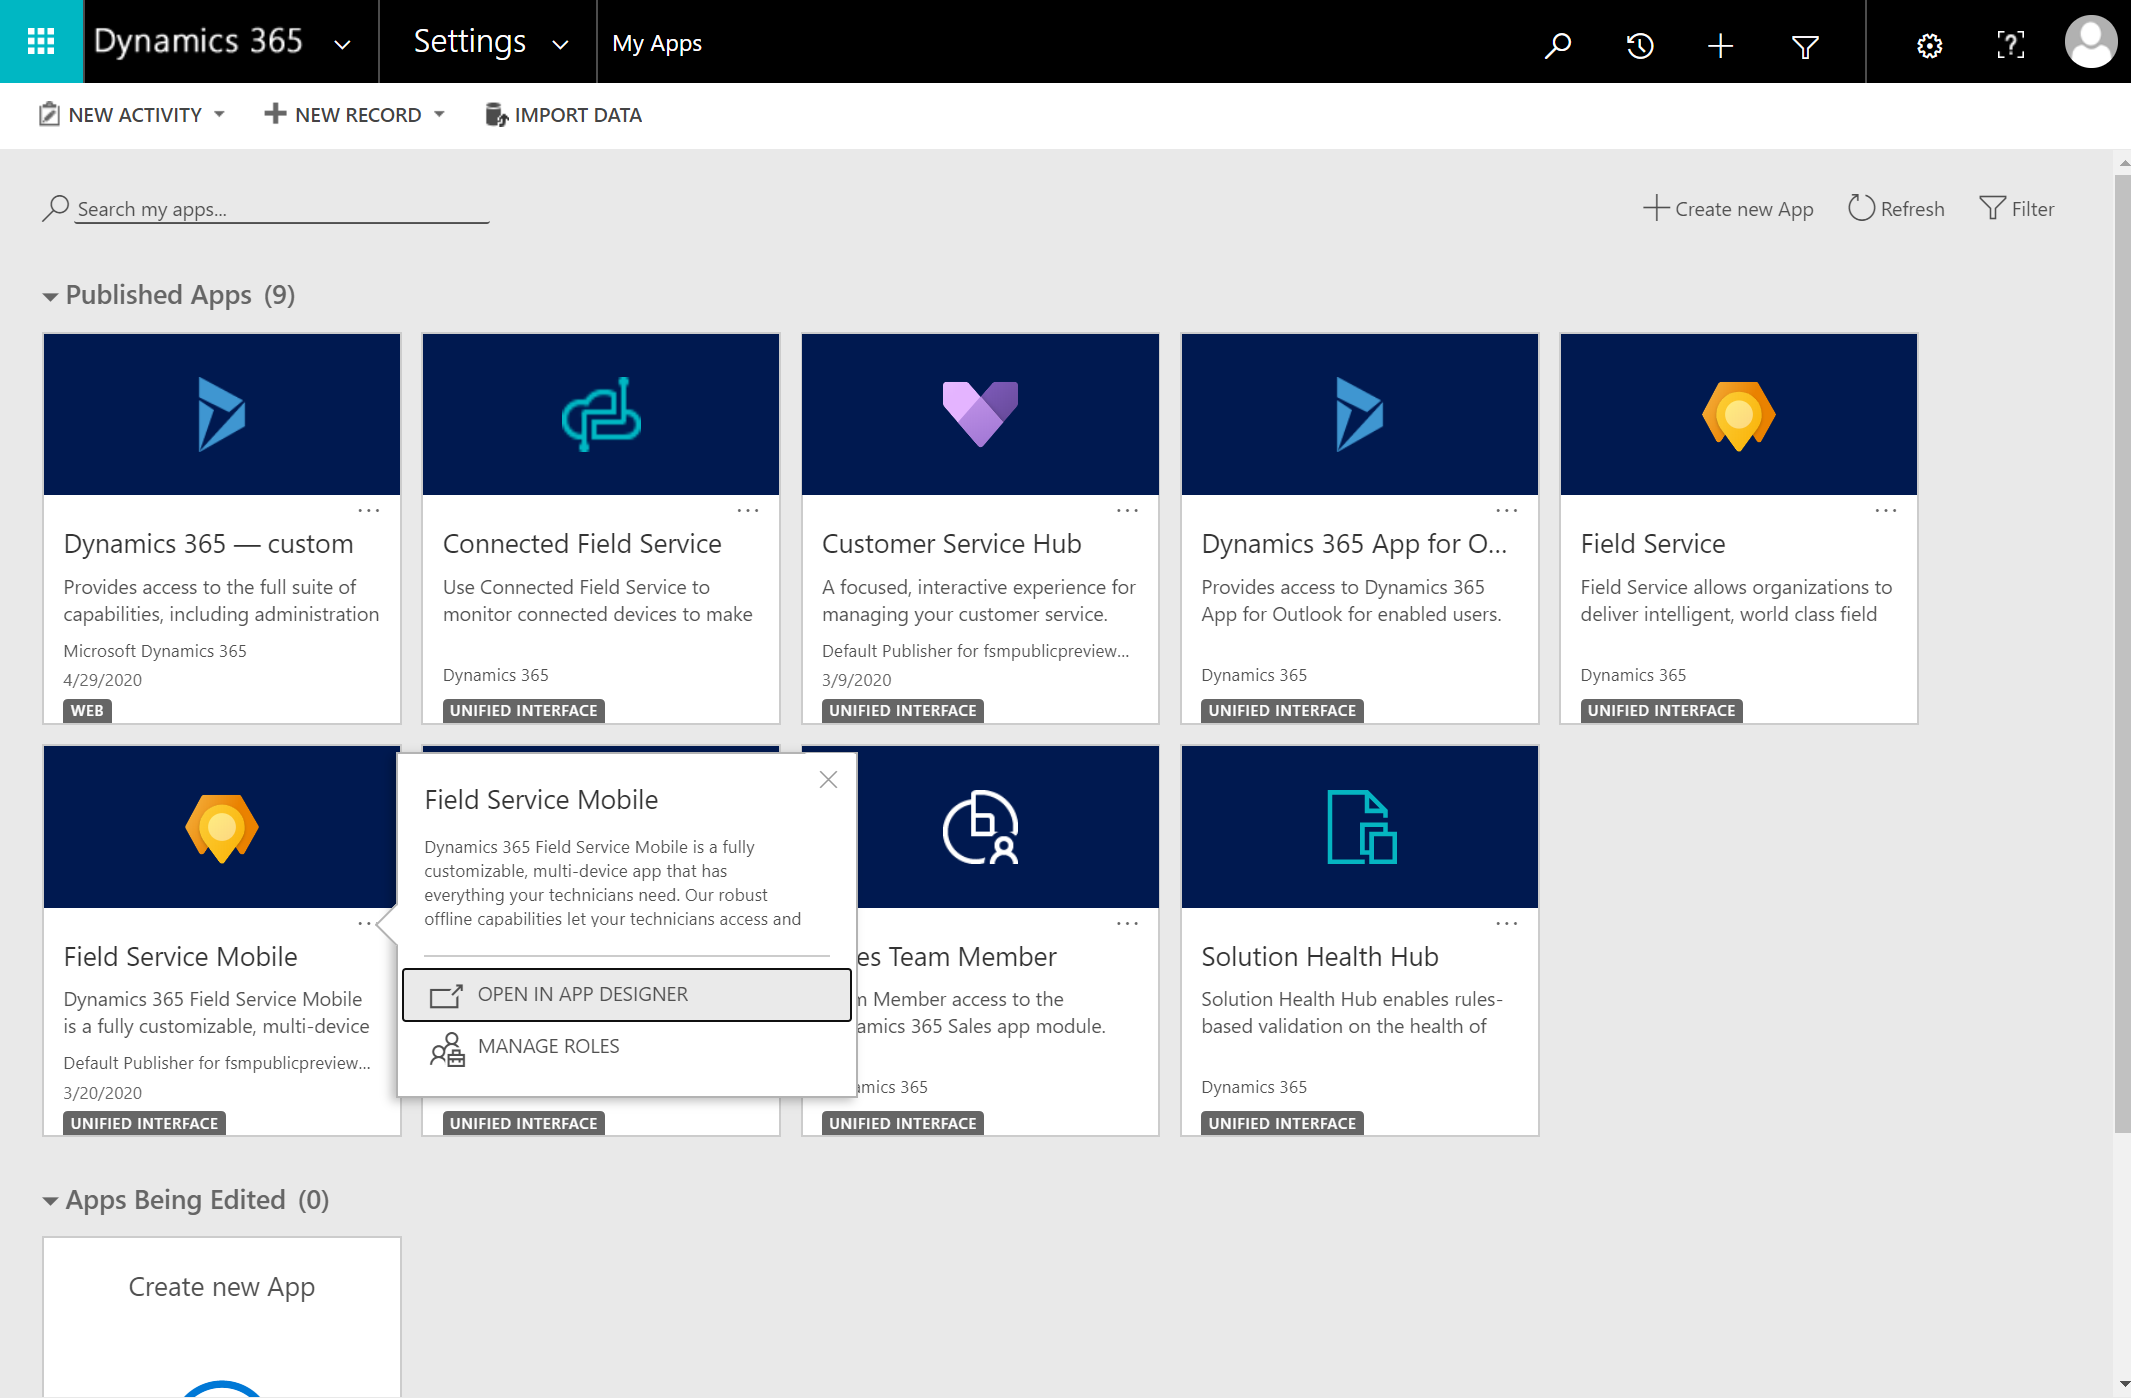 Screenshot of Dynamics 365, showing the list of apps and showing the option to open Field Service Mobile in the App Designer.